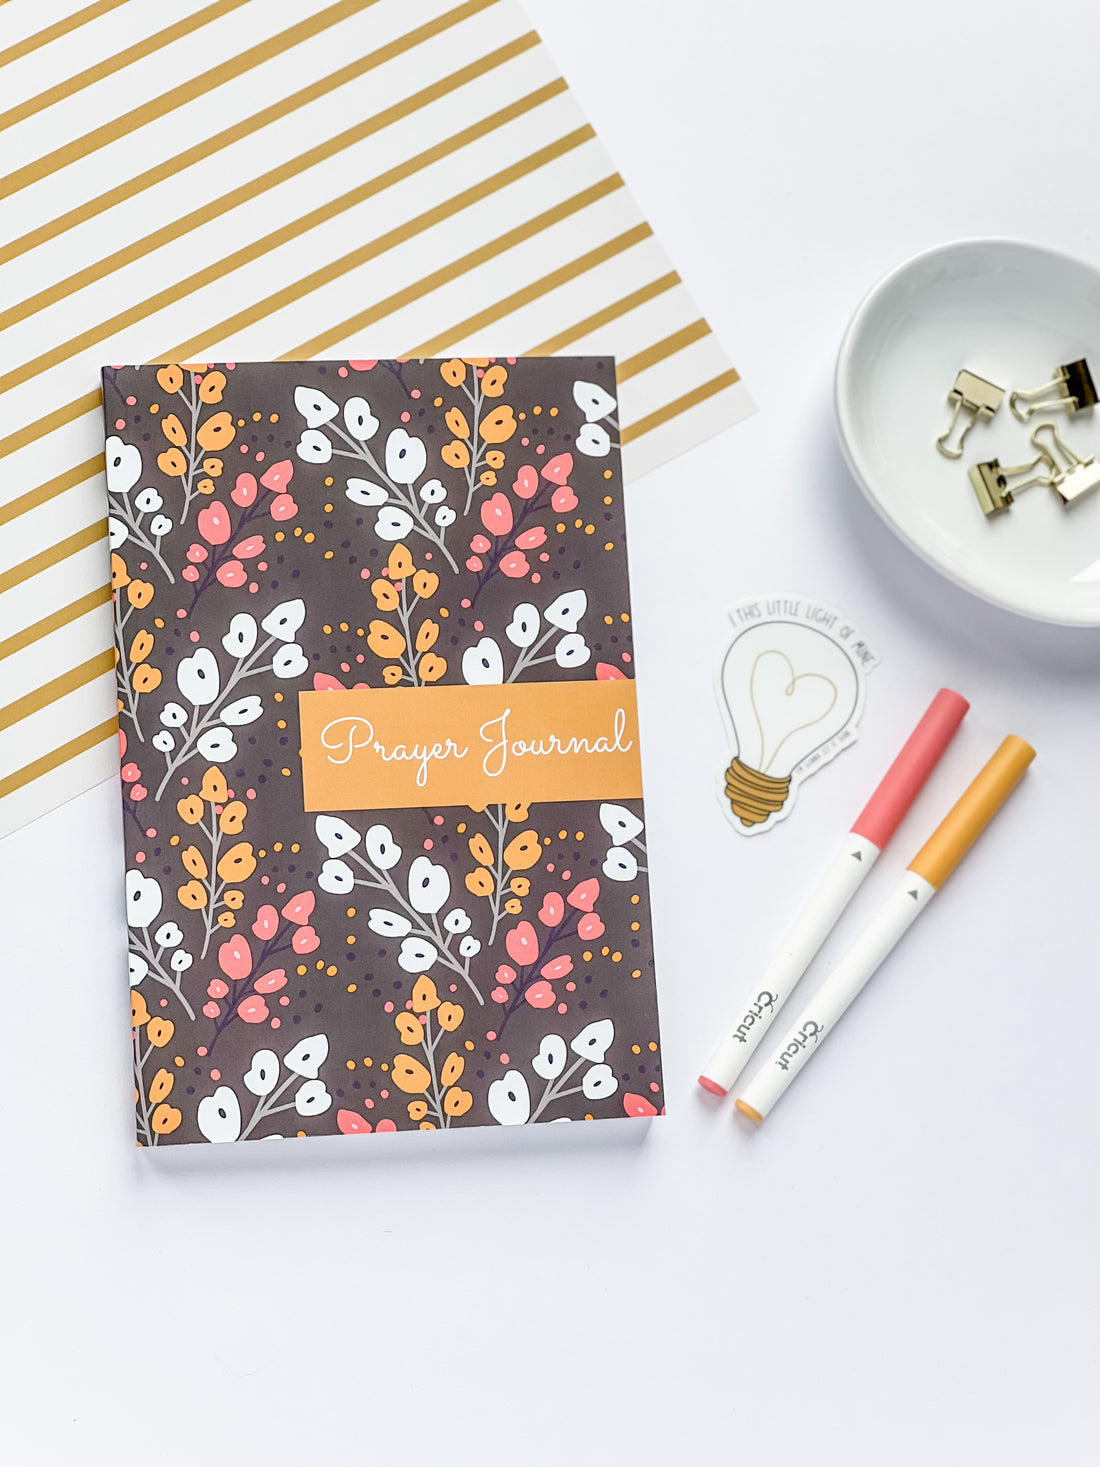 3 Ways To Use Your Prayer Journal